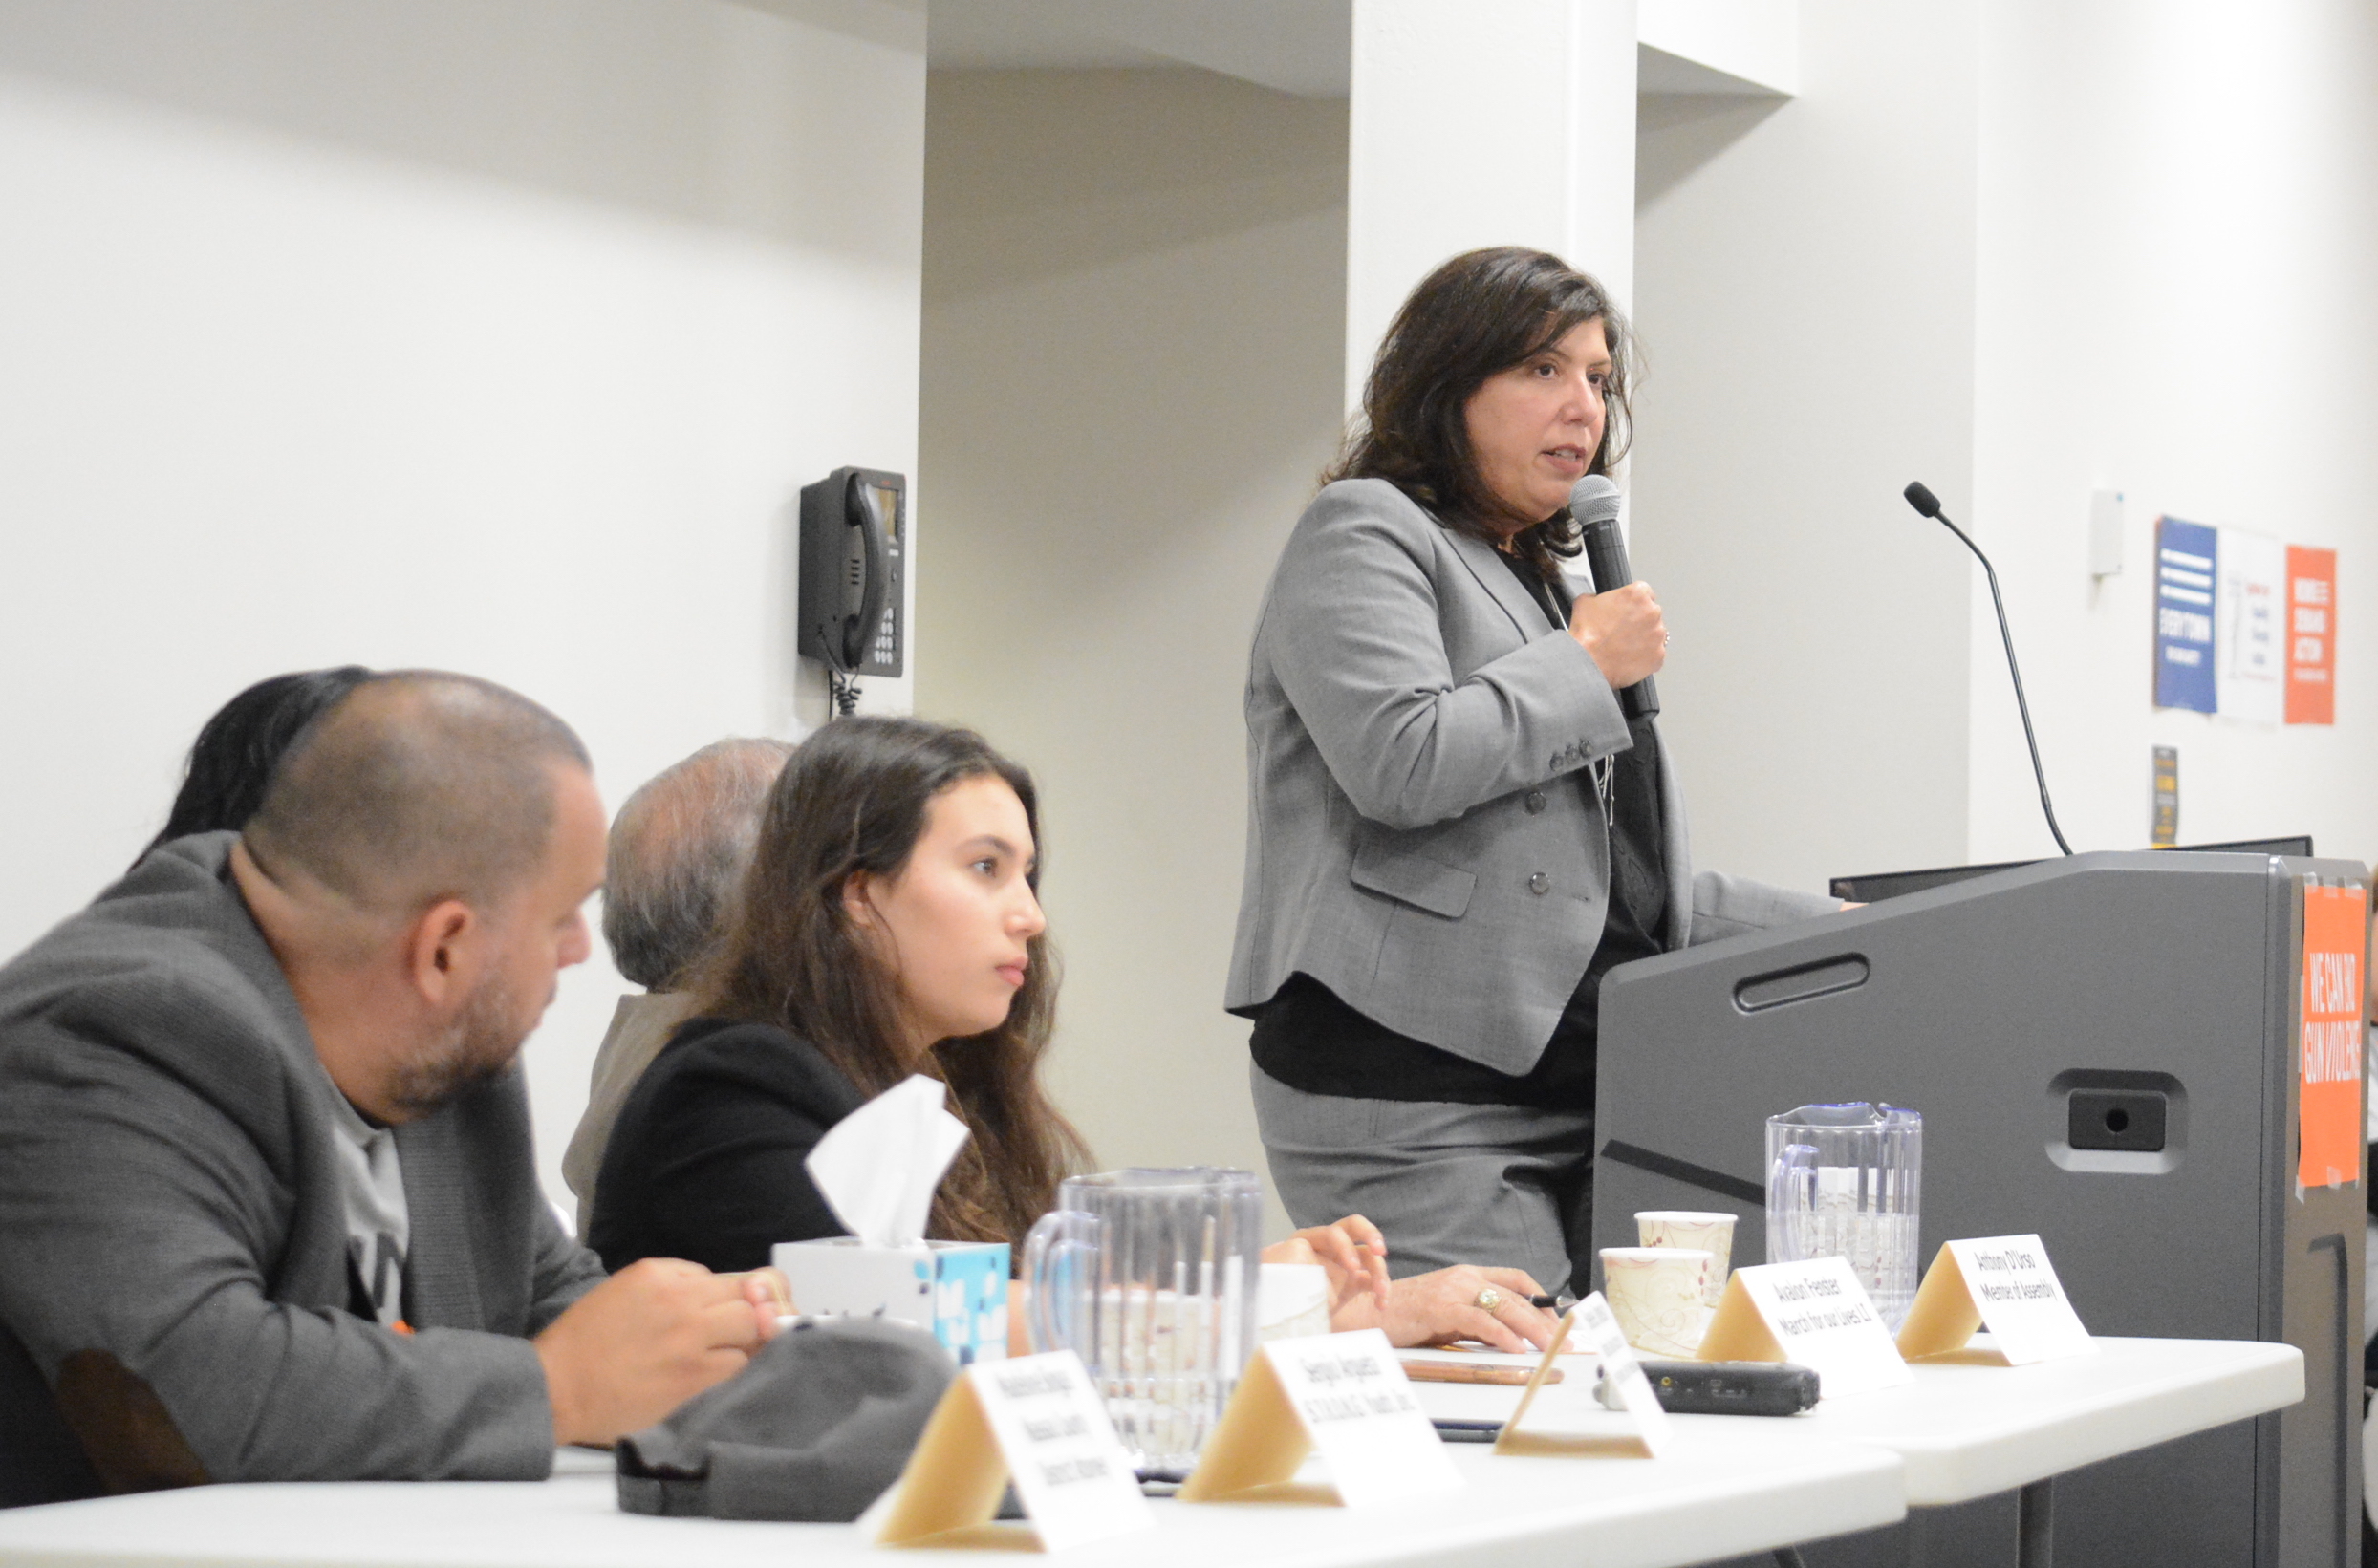 Nassau County DA Madeline Singas and other panelists addressed an audience at a gun violence prevention forum at the Great Neck Library on Thursday. (Photo by Janelle Clausen)